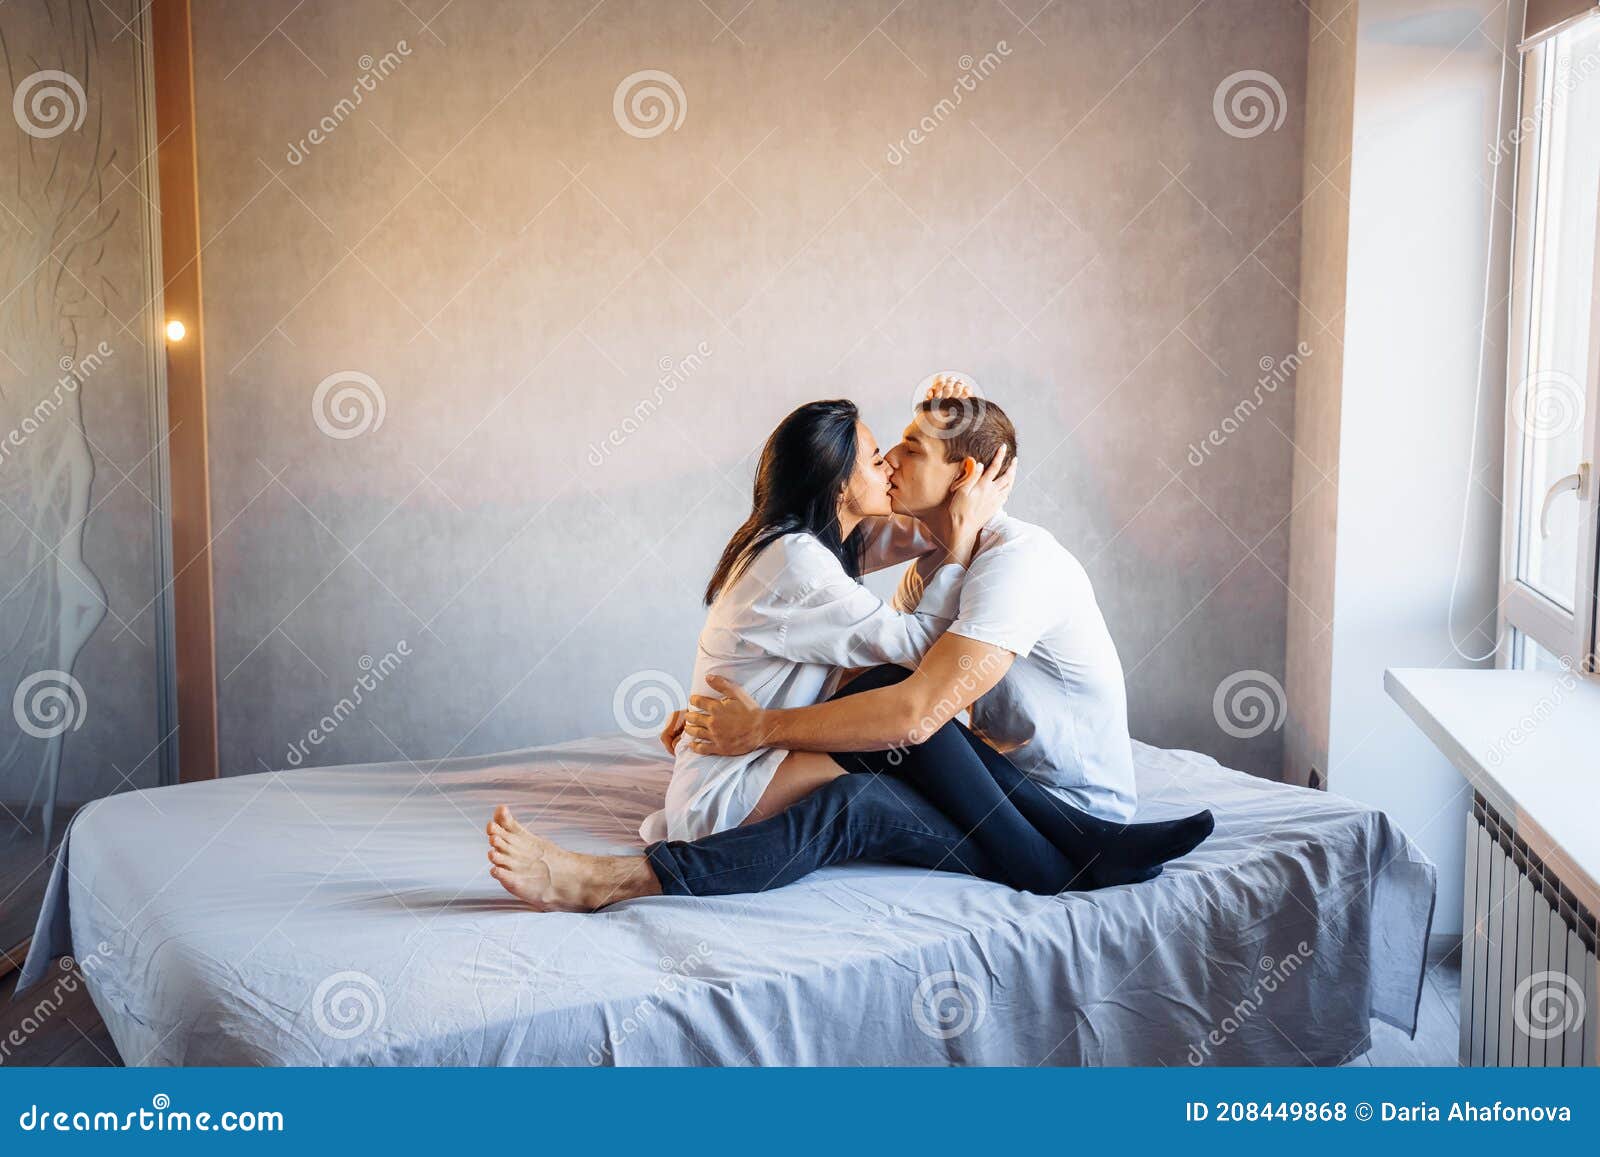 Attractive, Young Couple of Lovers Having Sex at Home in the Bed in Bright Room